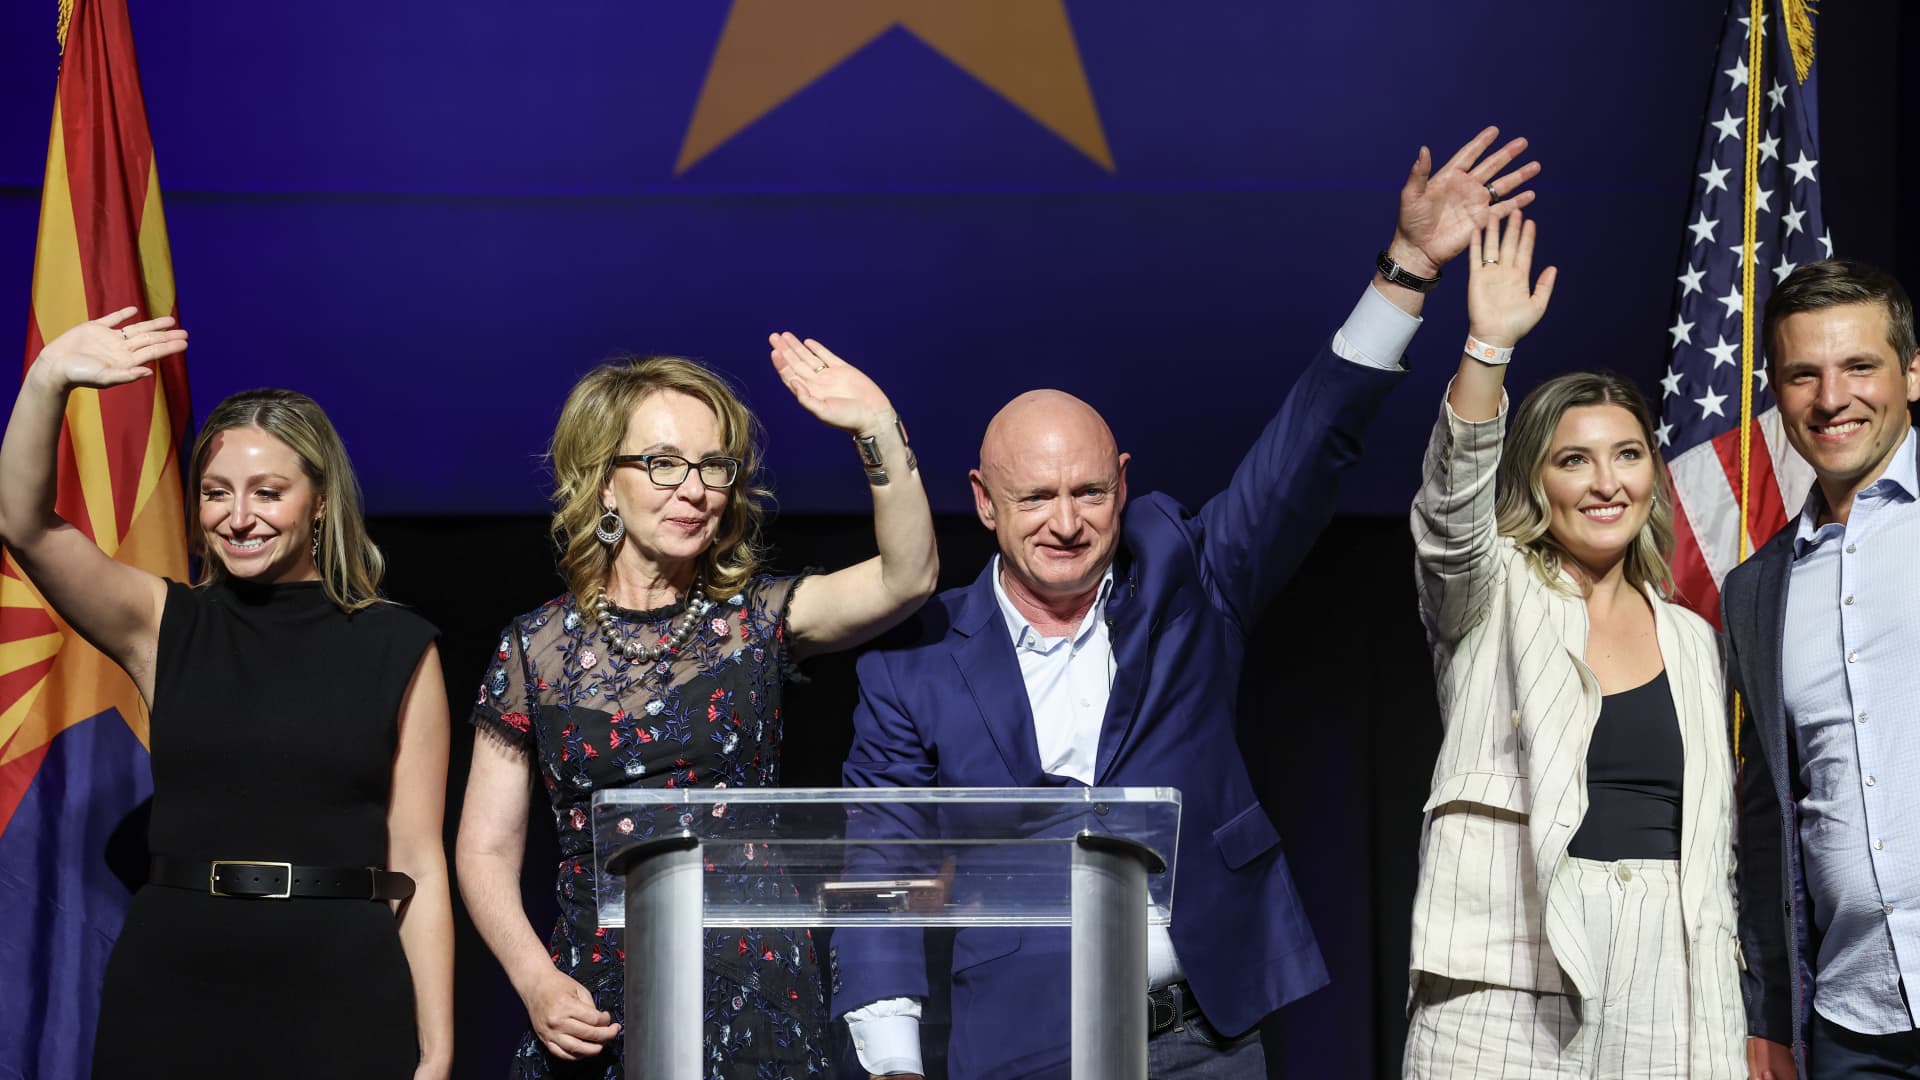 U.S. Sen. Mark Kelly (D-AZ) and his wife former Congresswoman Gabby Giffords, daughters Charlotte, Samantha and son in law Mark Sudman wave during his election night rally at the Rialto Theatre on November 08, 2022 in Tucson, Arizona.